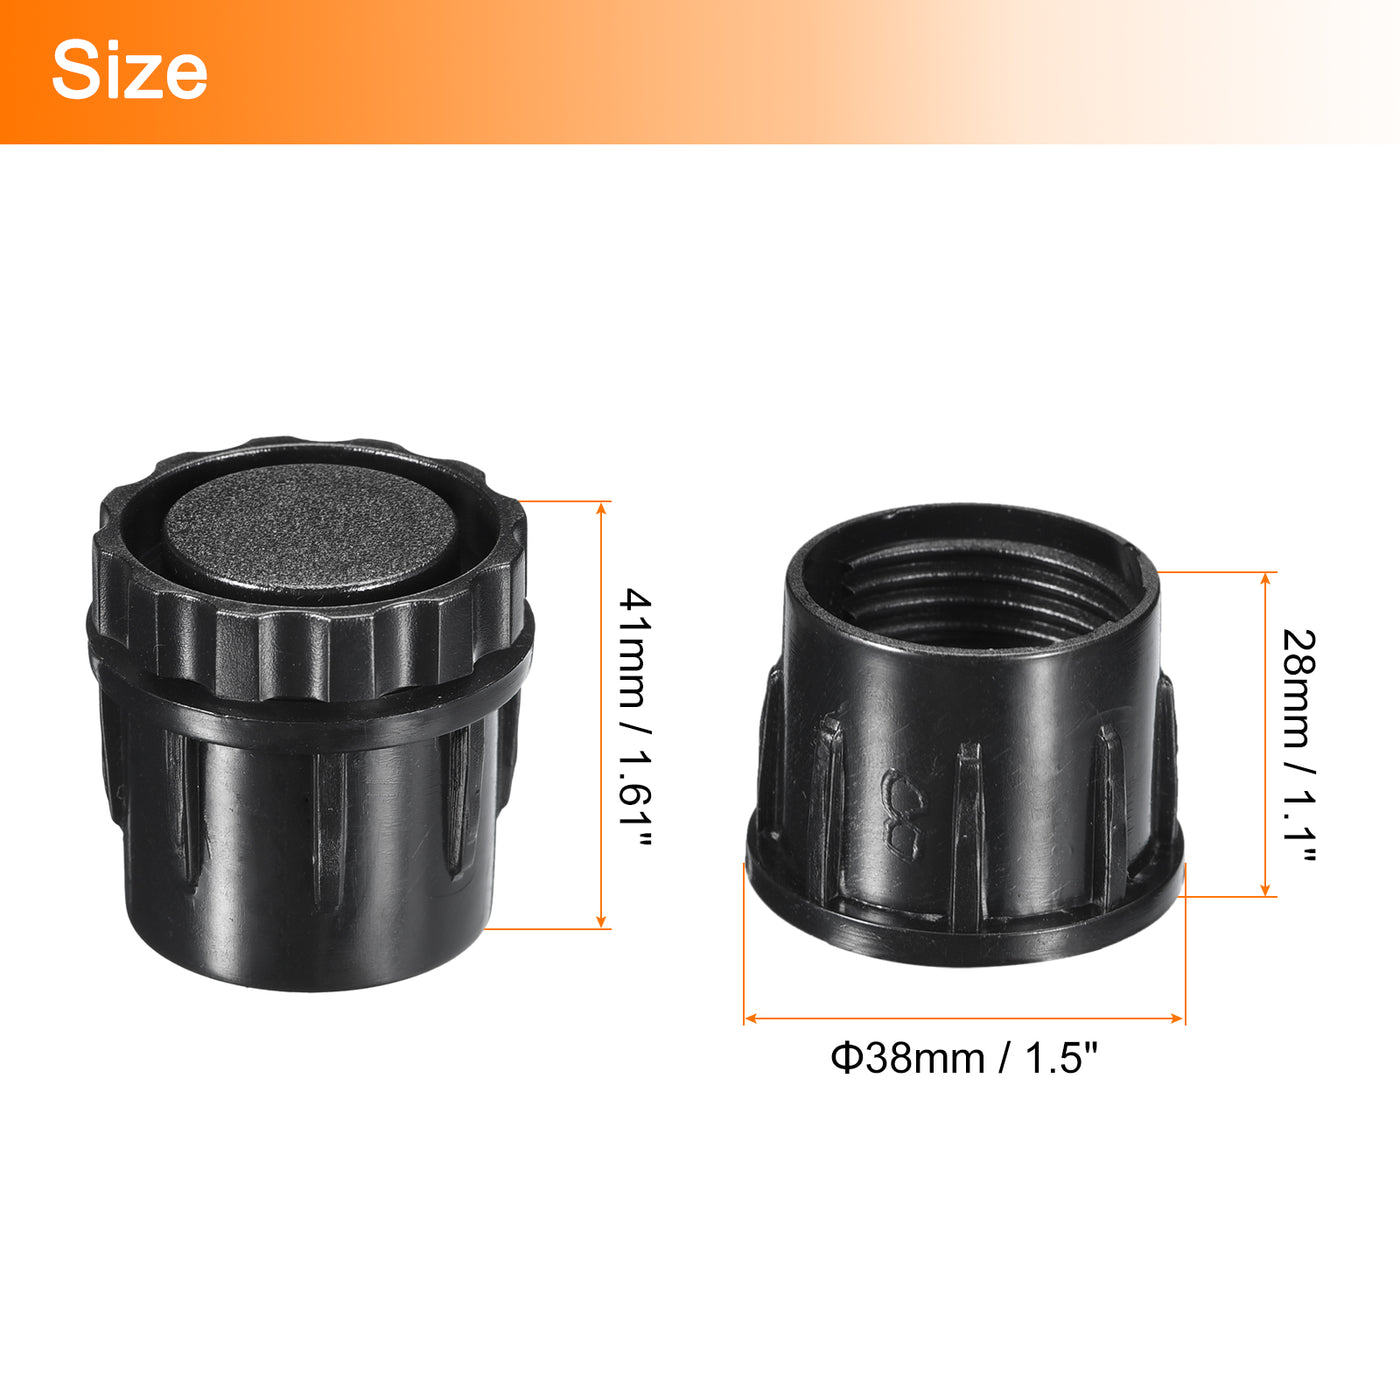 uxcell Uxcell 4Pcs Inserts for Round Tubes with Leveling Feet, for 38mm/1.5" Dia Round Tube